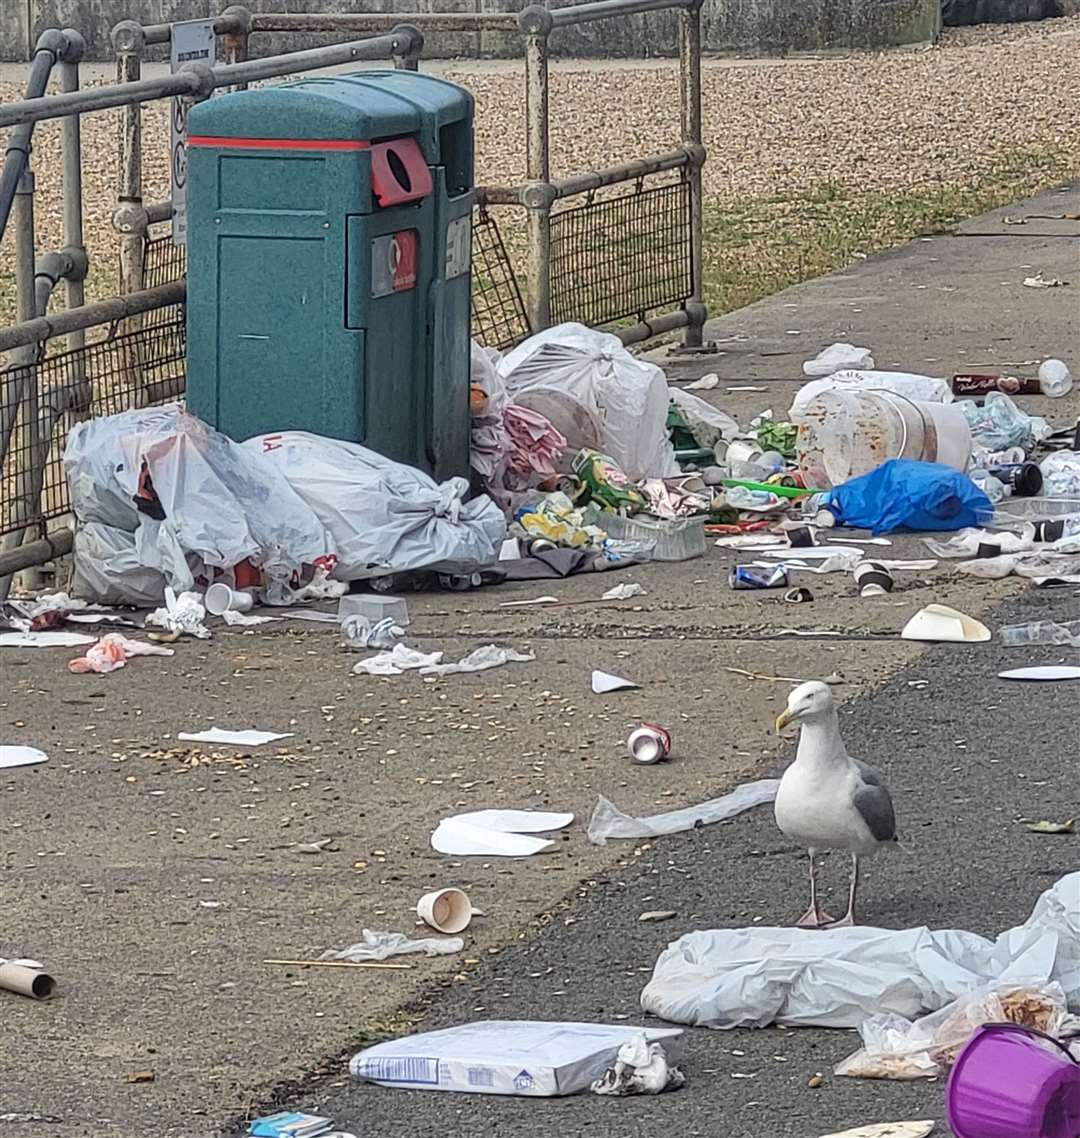 It is not the first time litter has covered the pavements in Folkestone. Picture: Liam Godfrey